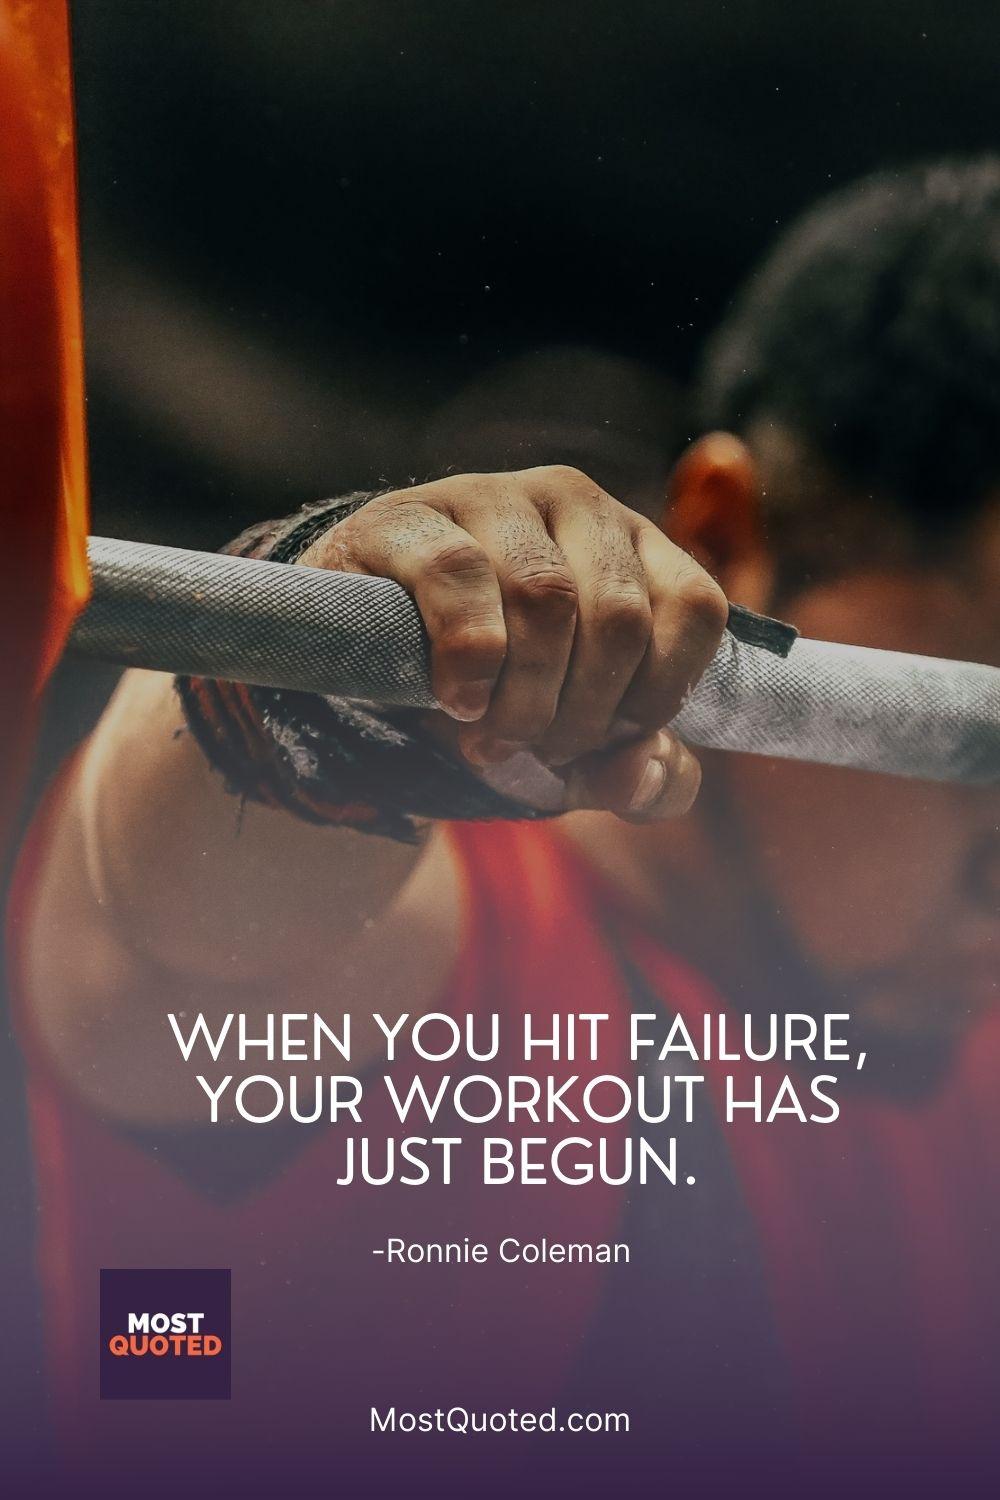 When you hit failure, your workout has just begun.